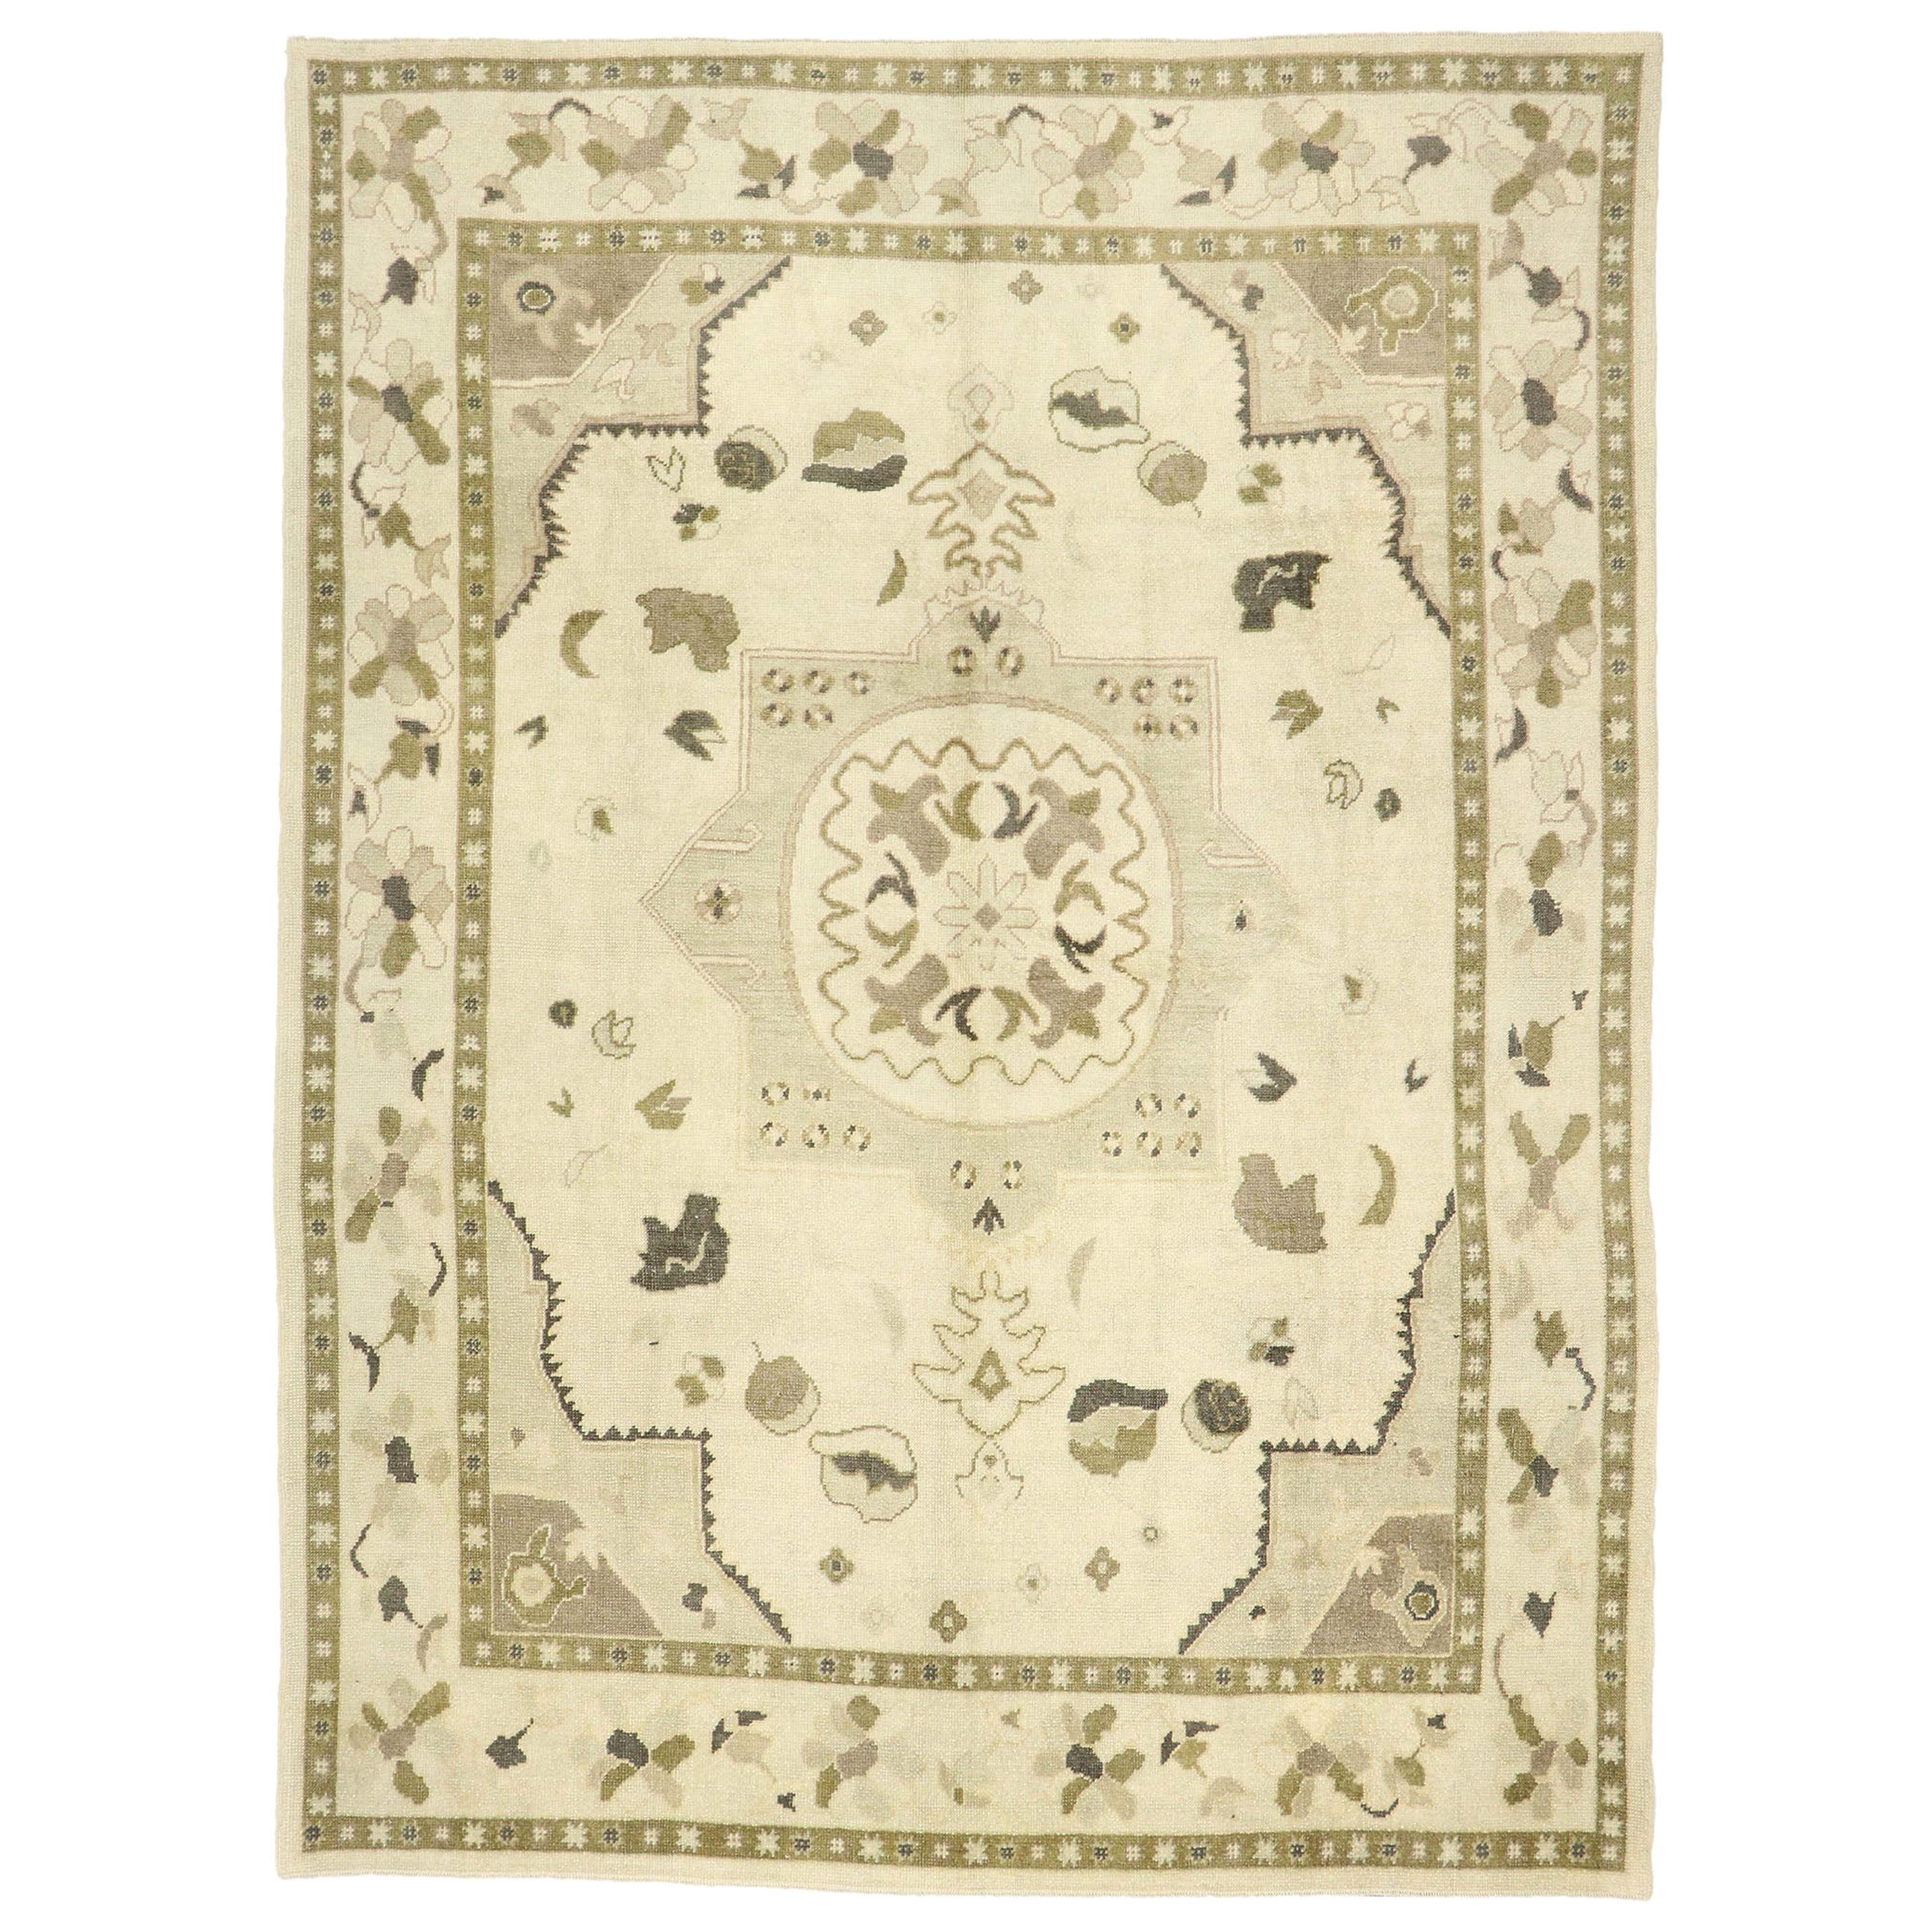 New Contemporary Turkish Oushak Rug with Modern Shaker Style